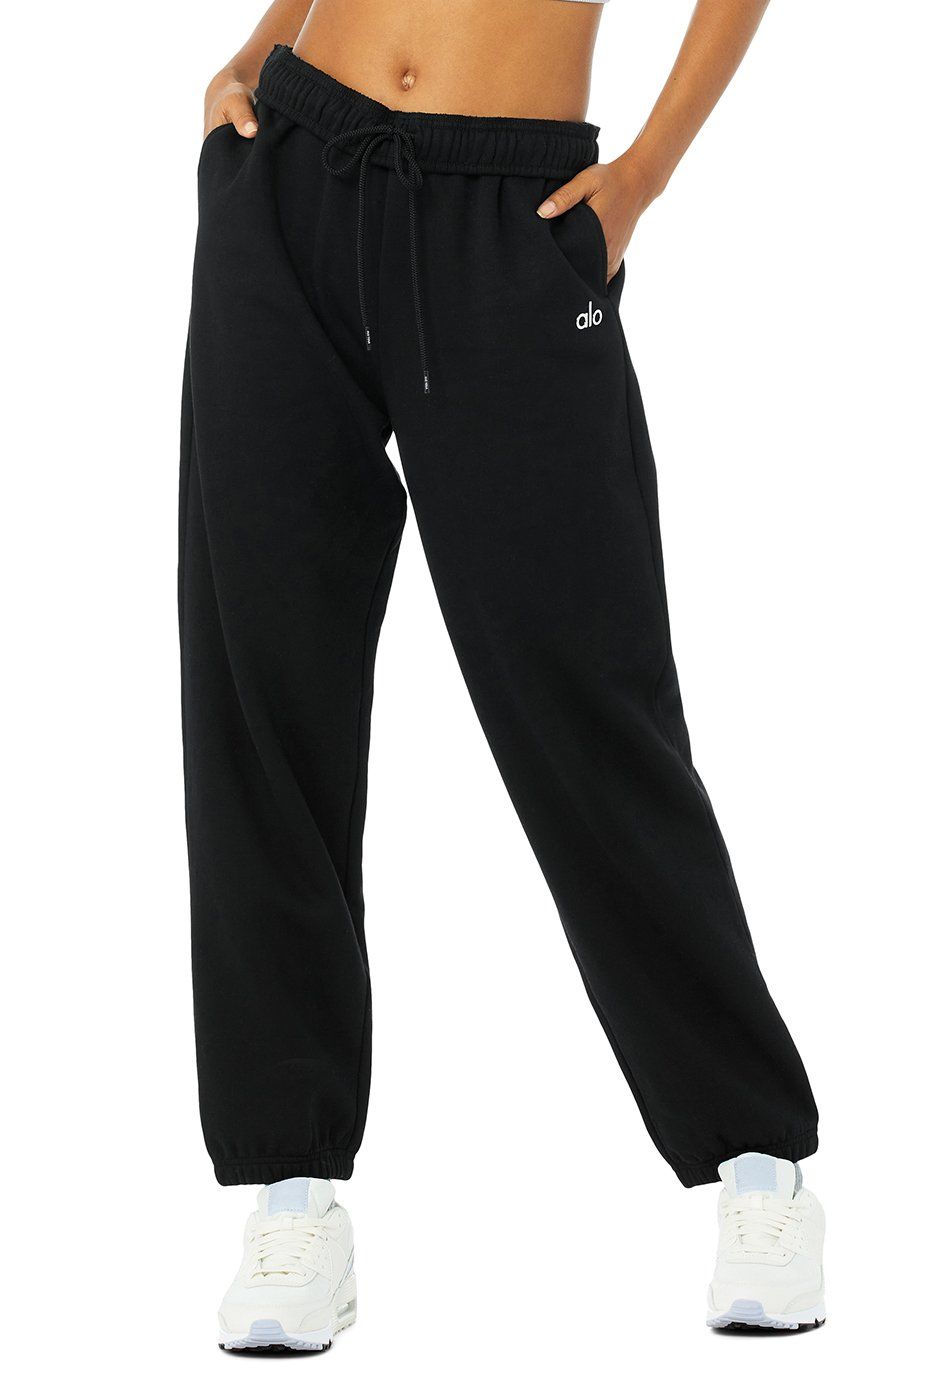 Buy Women's Track Pants Online in Kuwait, Up to 60% Off